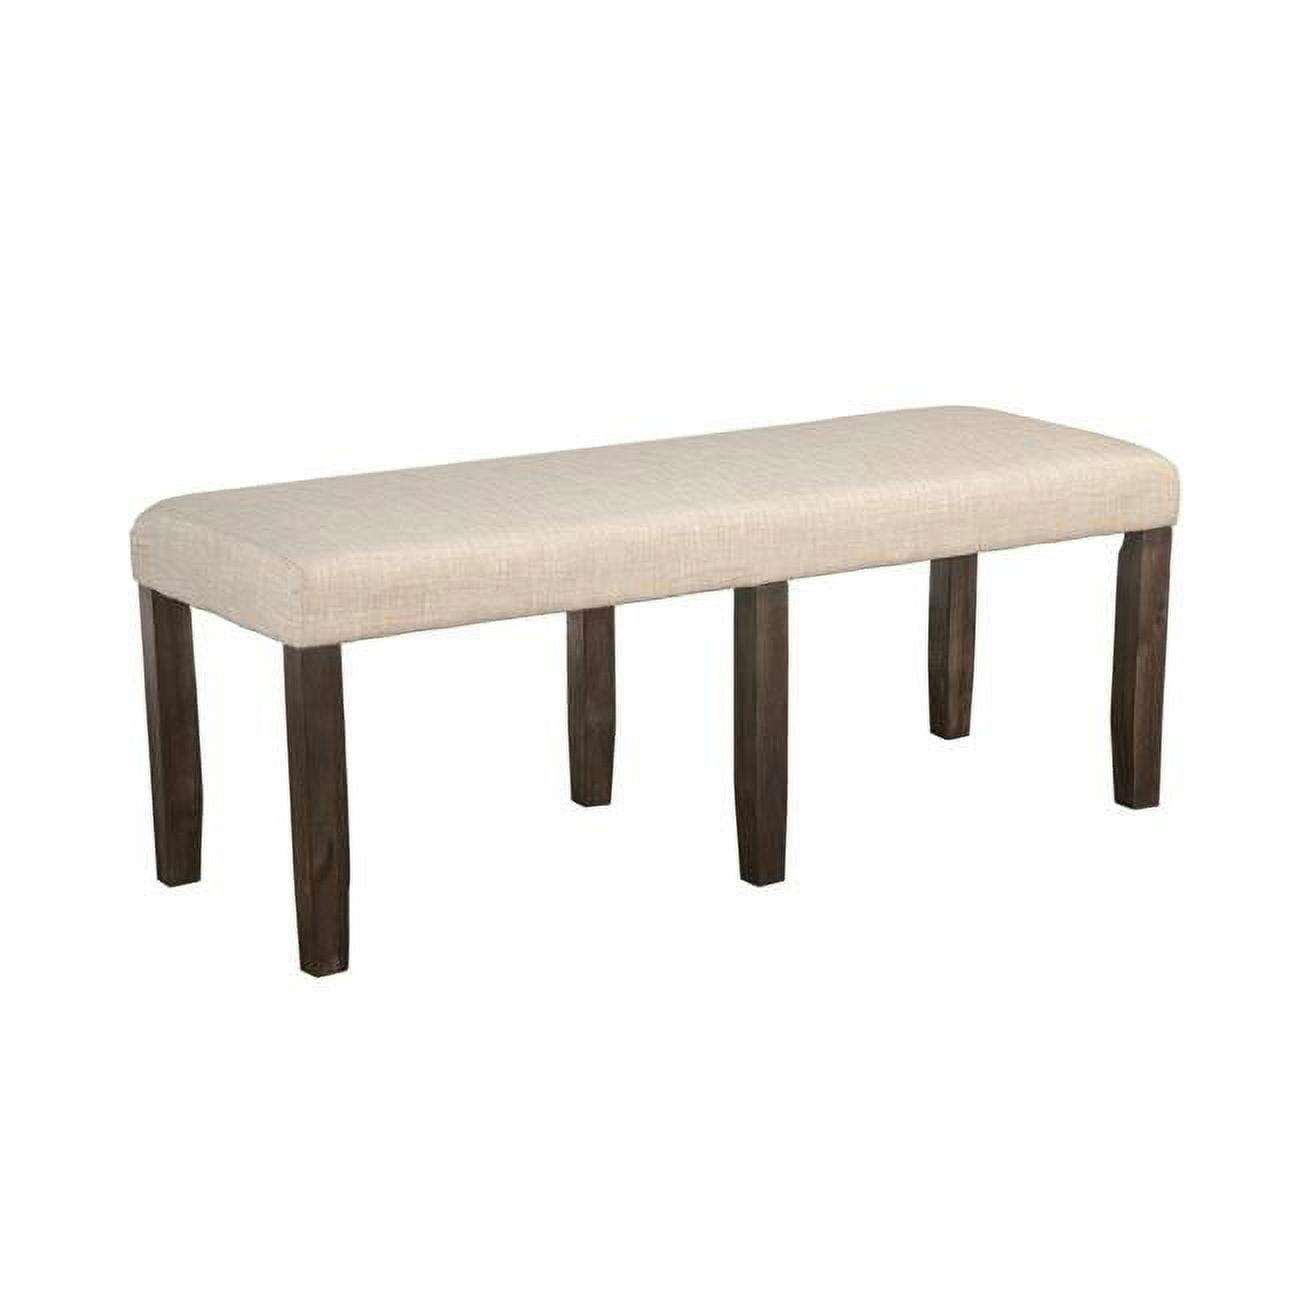 Transitional Brayden Dining Bench in Rich Espresso and Beige Fabric